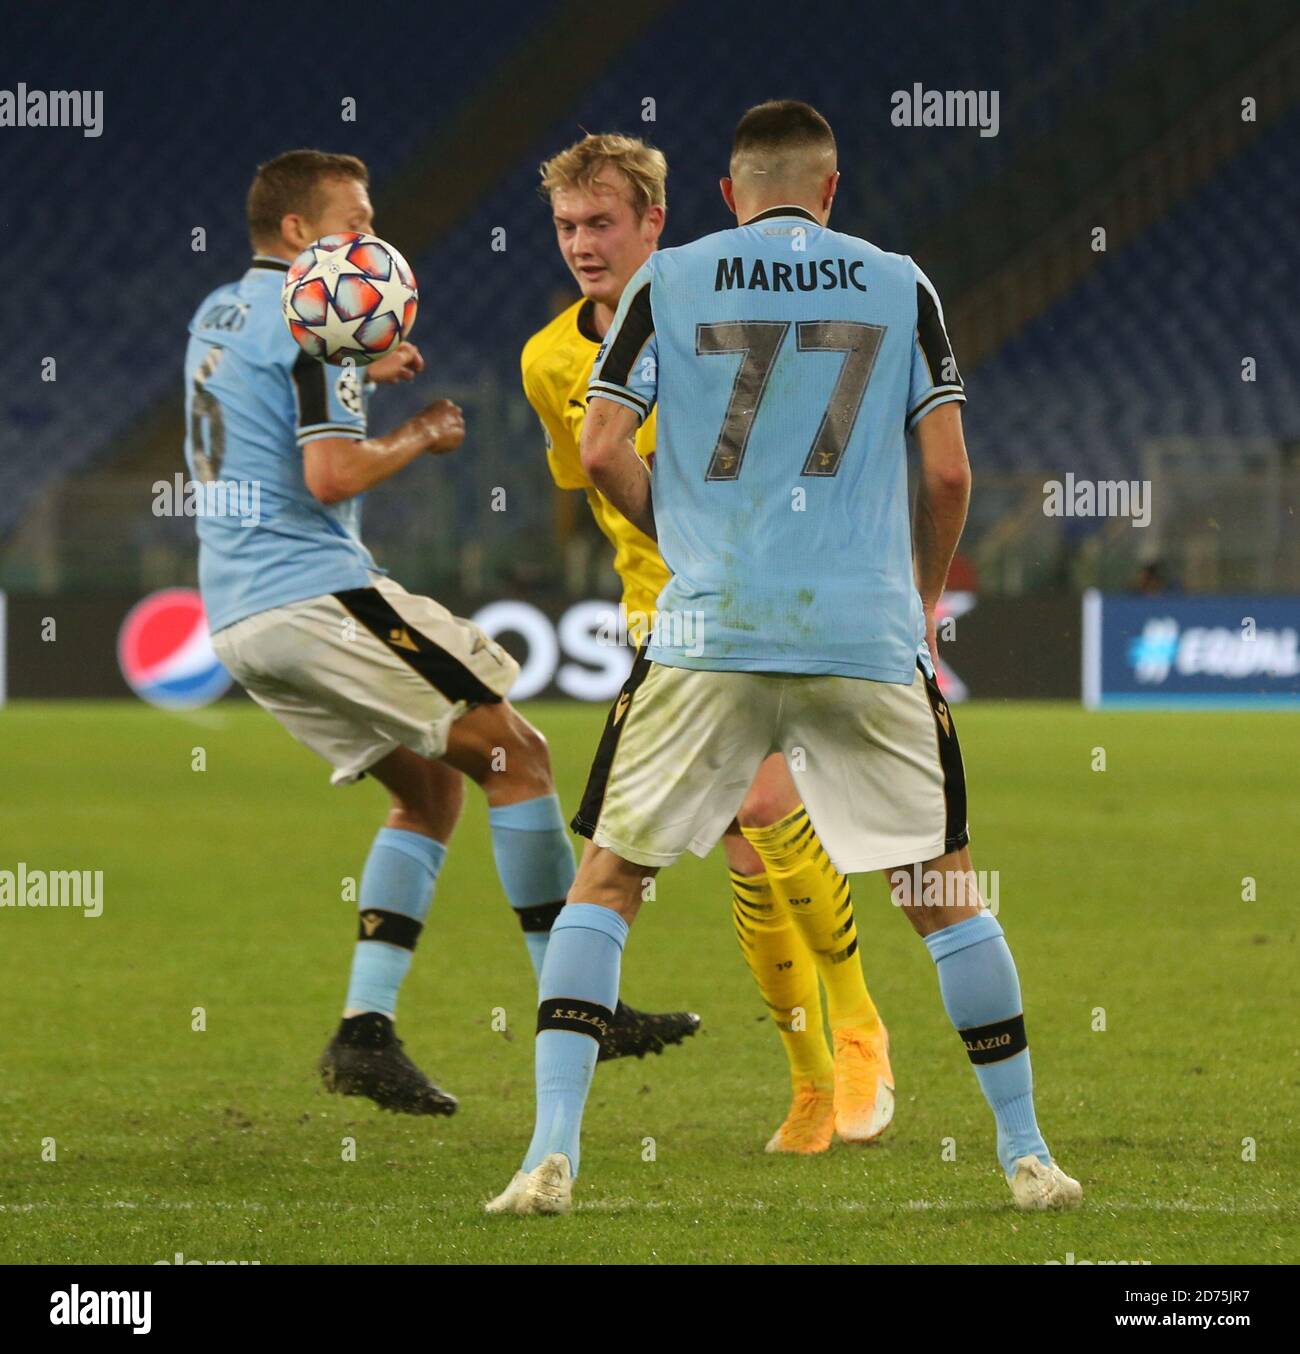 Rom, Italy. 20th Oct, 2020. Football: Champions League, Lazio Rome - Borussia Dortmund, group stage, Group F, Matchday 1 at the Stadio Olimpico di Roma. Julian Brandt (M) from Borussia Dortmund against Lucas Leiva (r) and Adam Marusic from Lazio in the fight for the ball. Credit: Cesar Luis de Luca/dpa/Alamy Live News Stock Photo